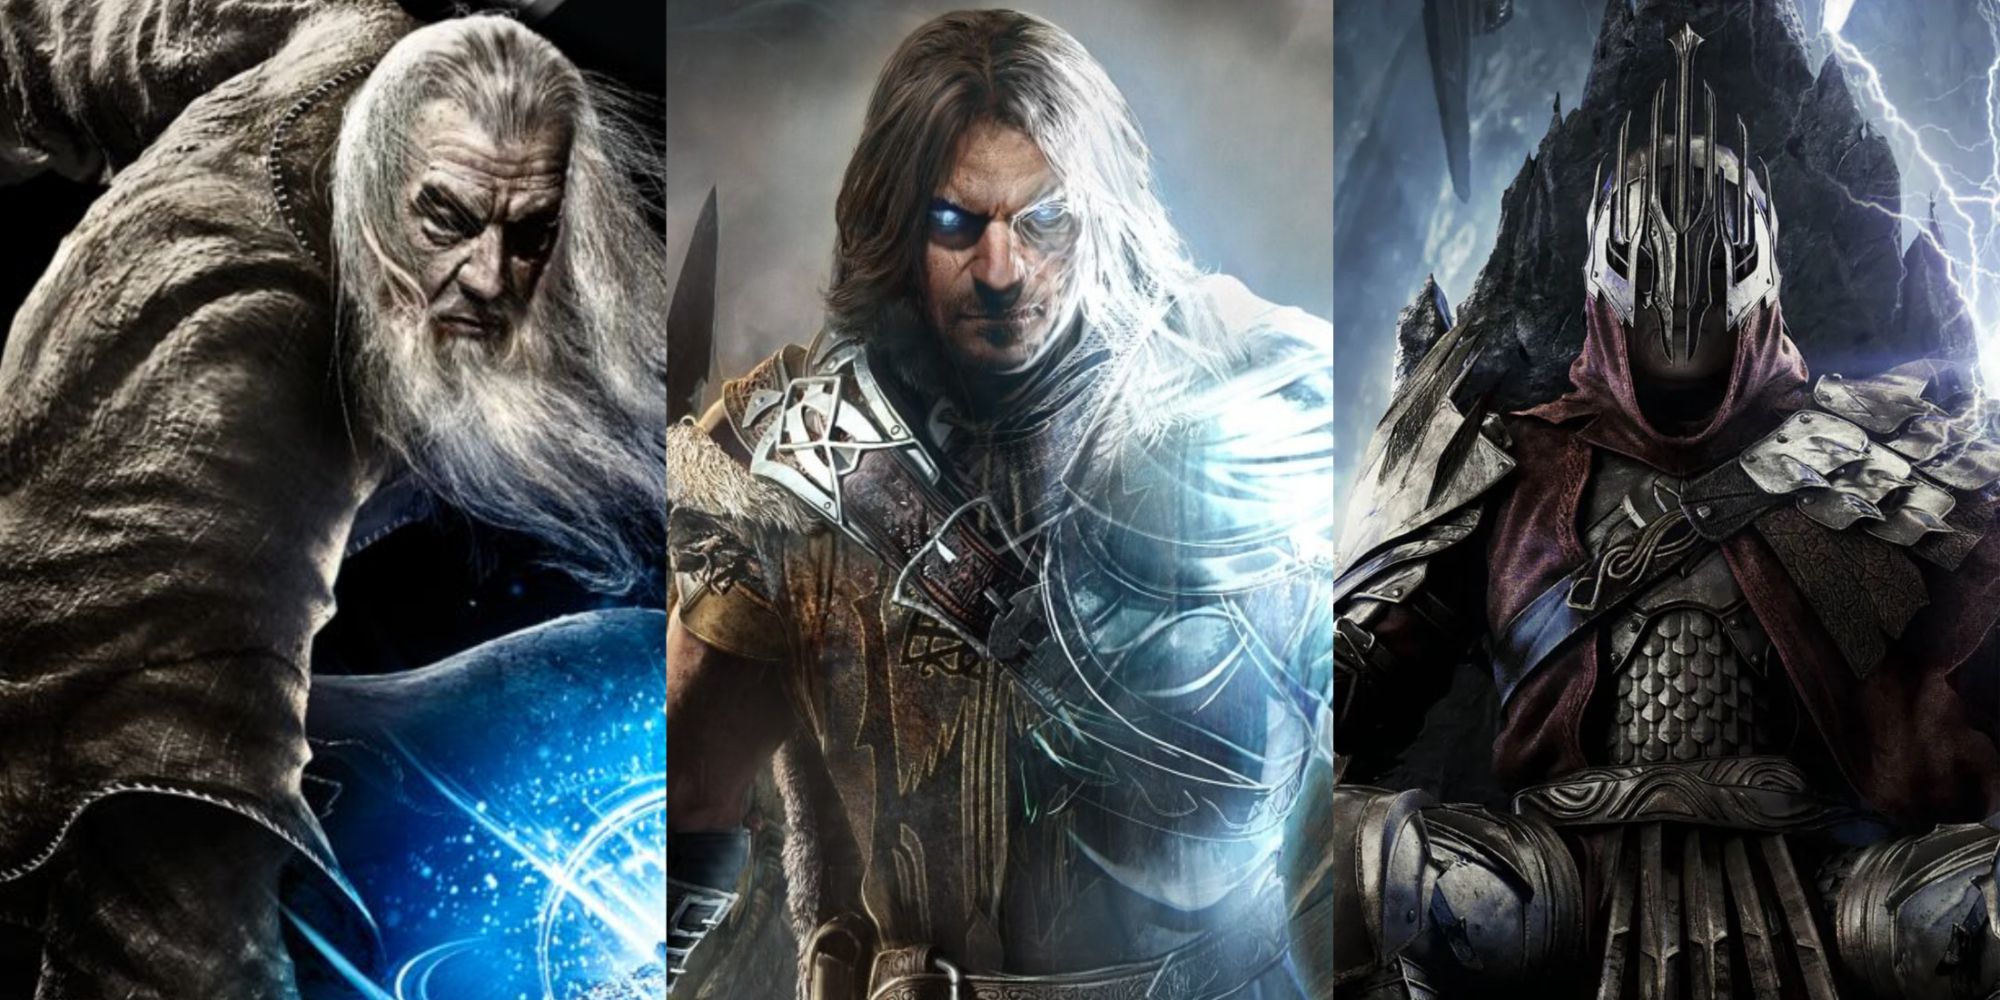 Split image of characters from various Middle-Earth games